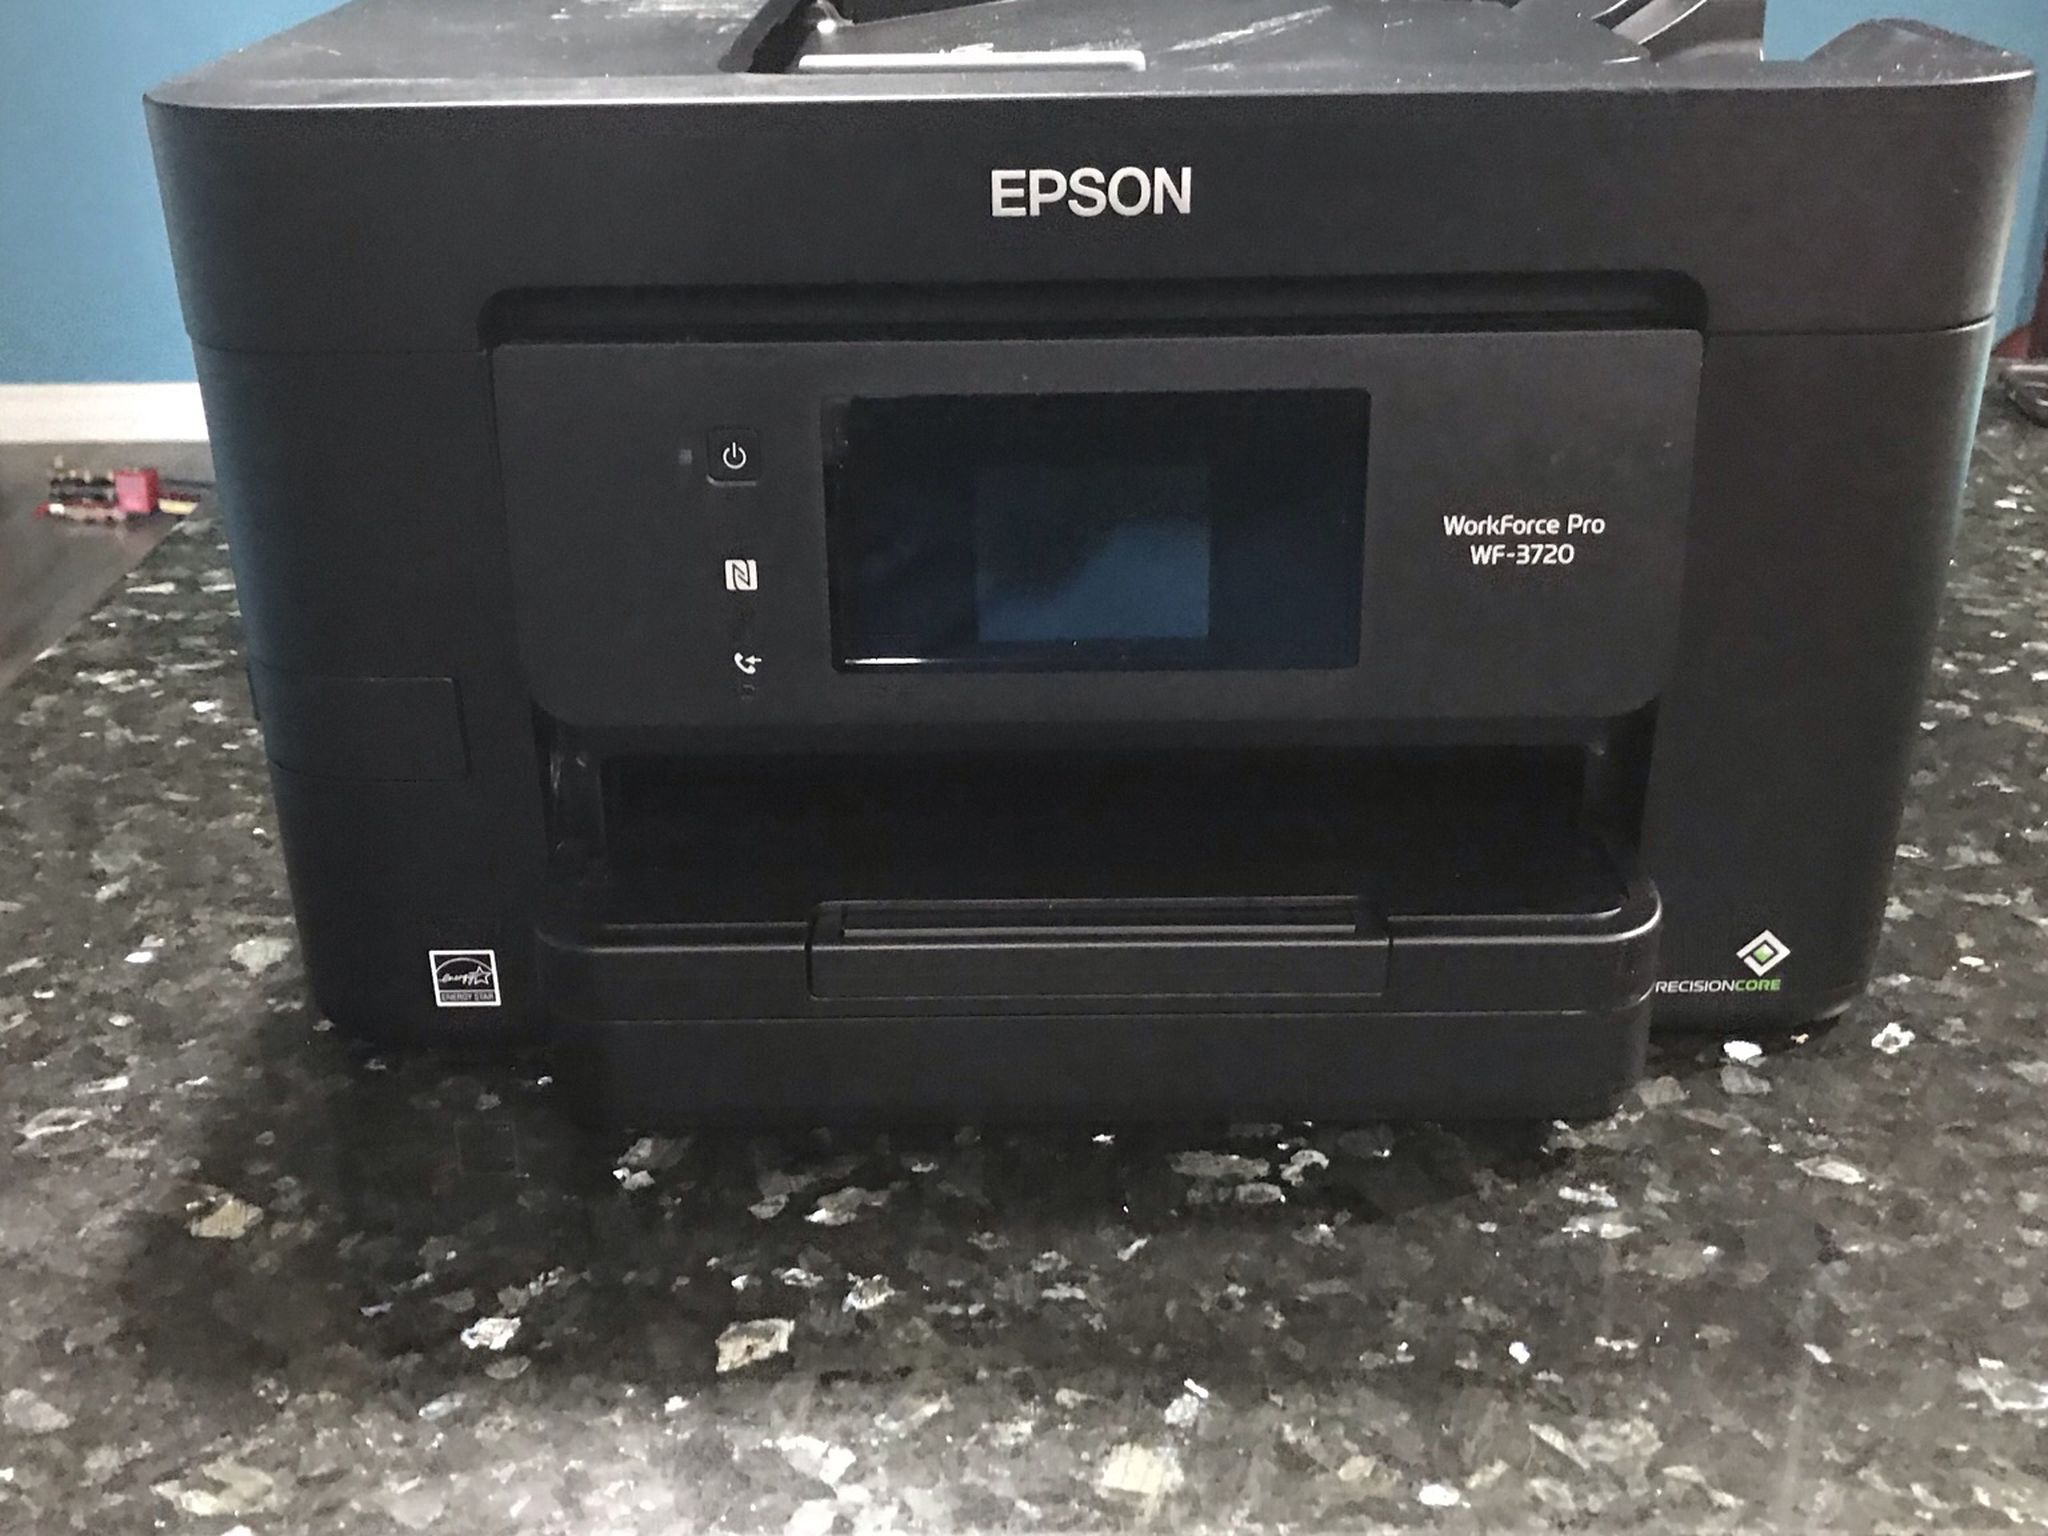 Epson Workforce Pro WF-3720 Wireless All-in-one Color Ink Jet Printer $90 OBO